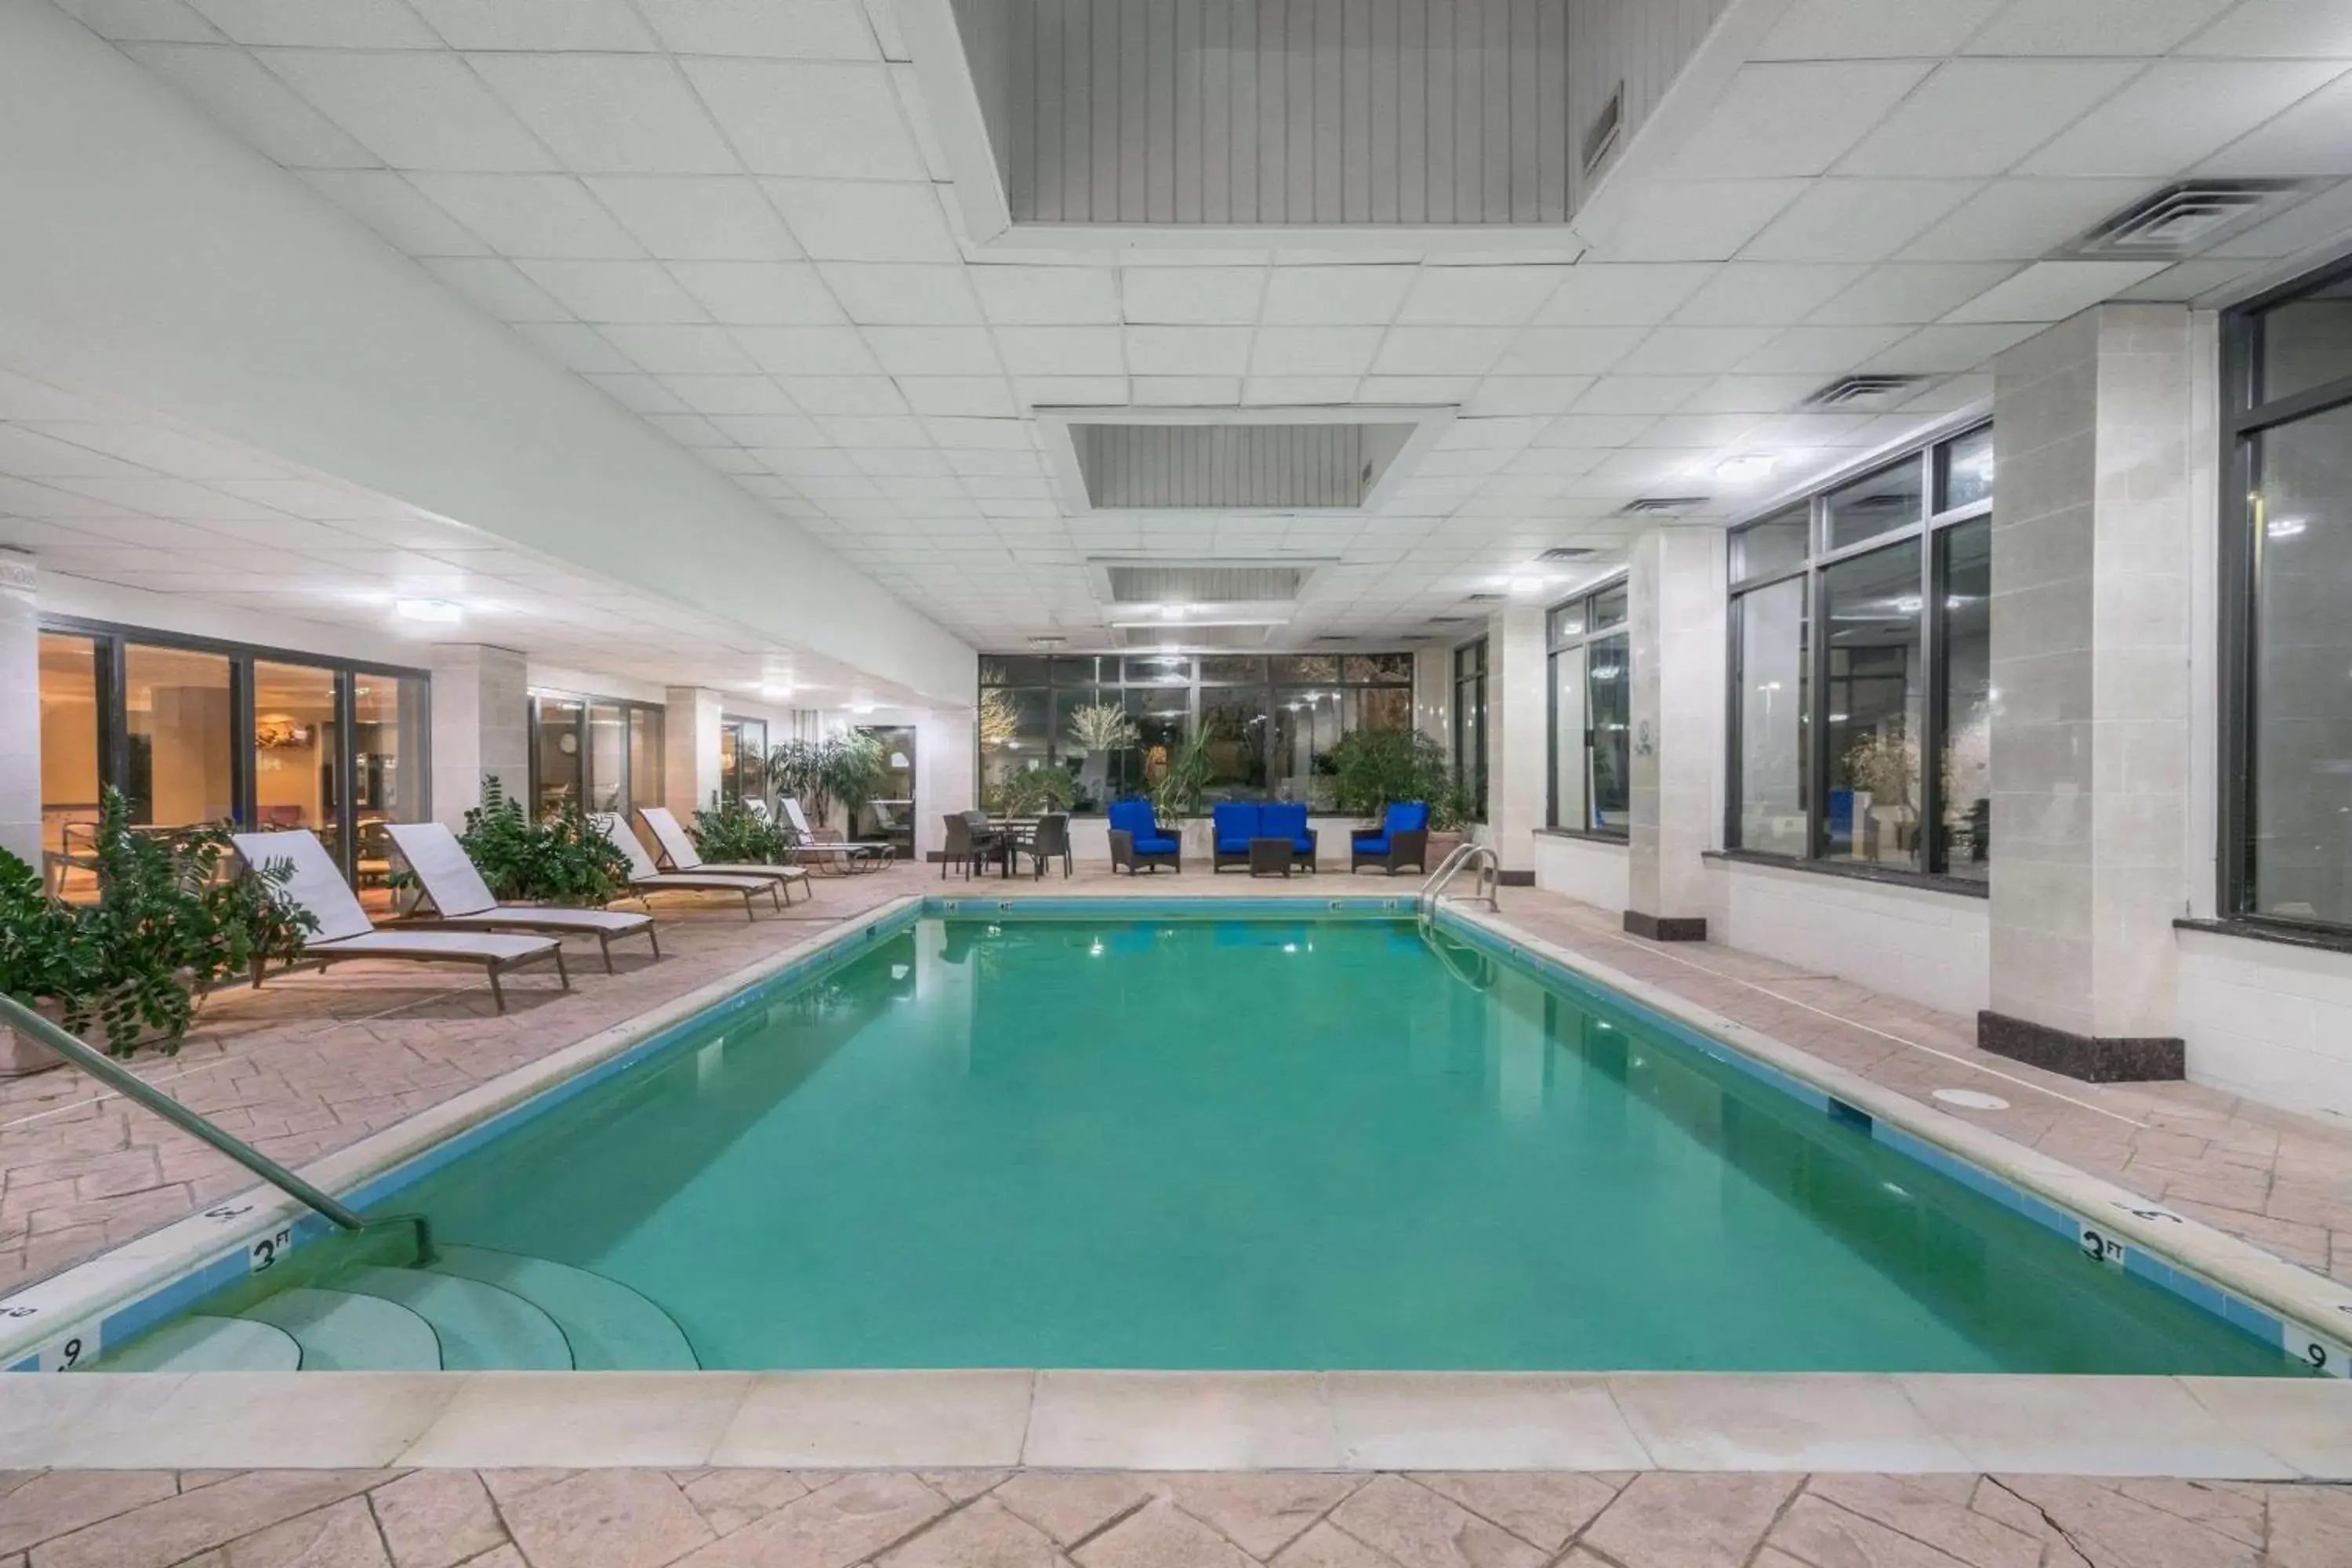 On site, Swimming Pool in Wingate by Wyndham (Lexington, VA)